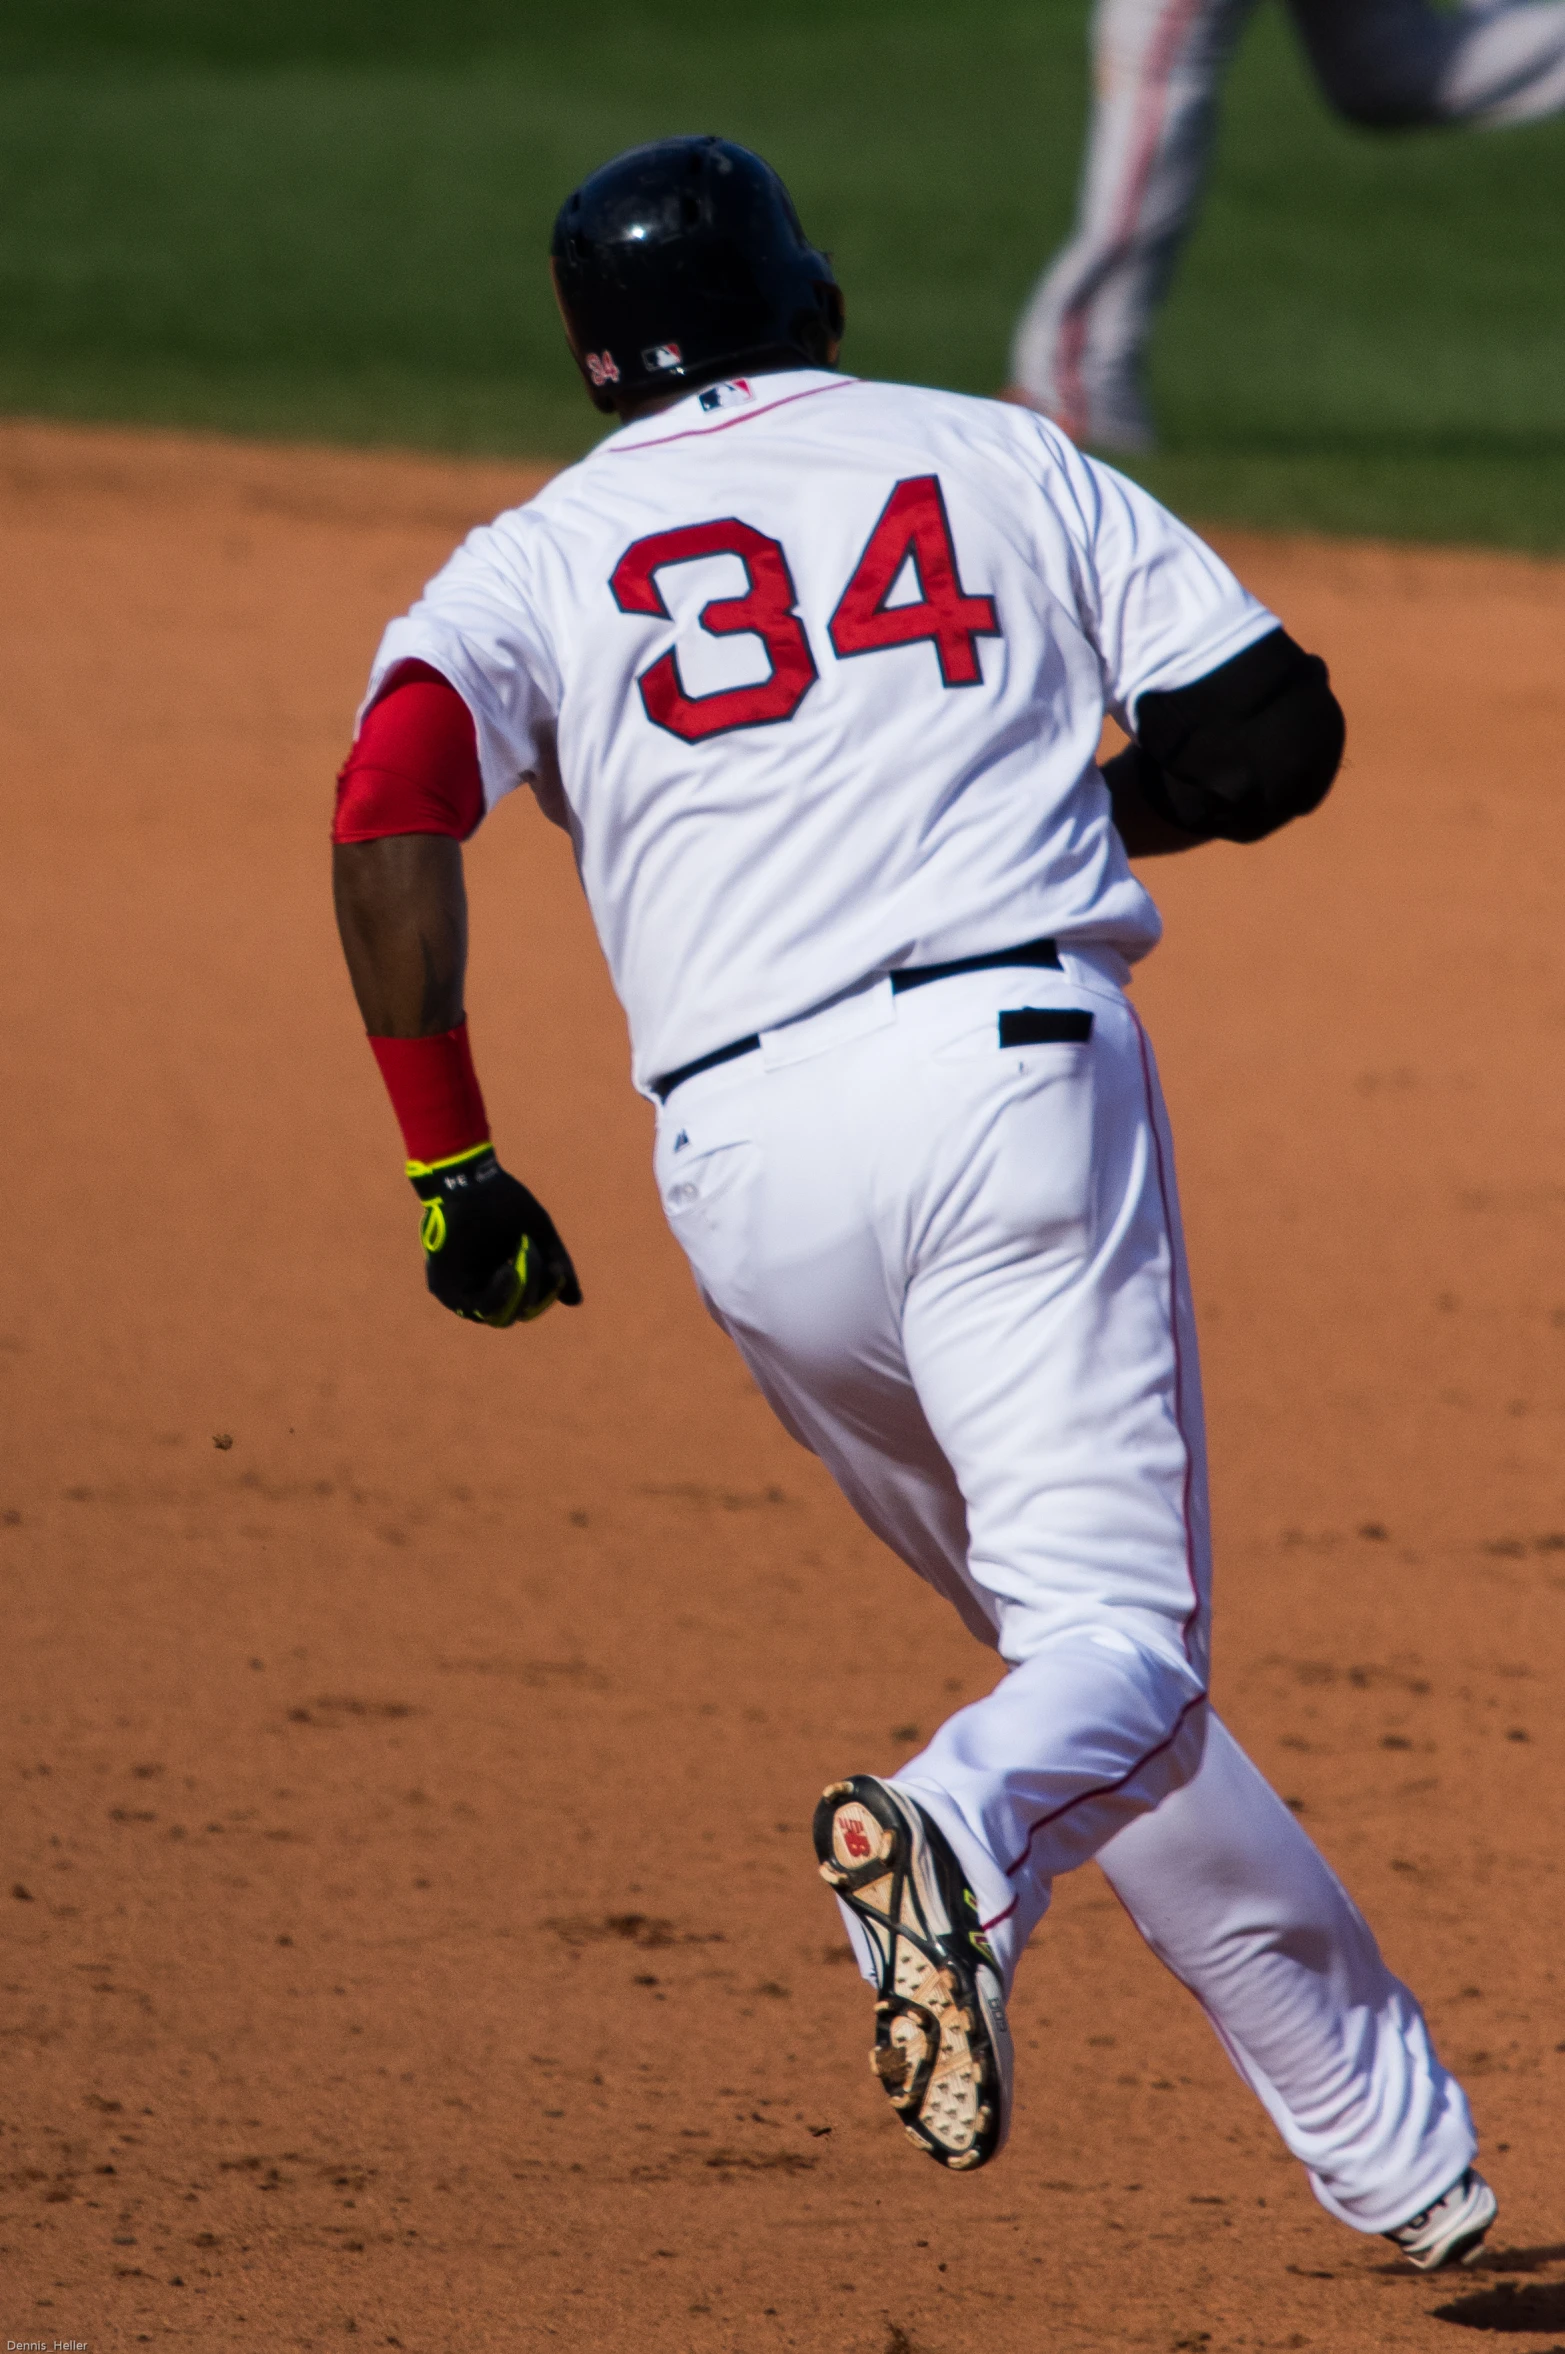 a baseball player running on a base during a game